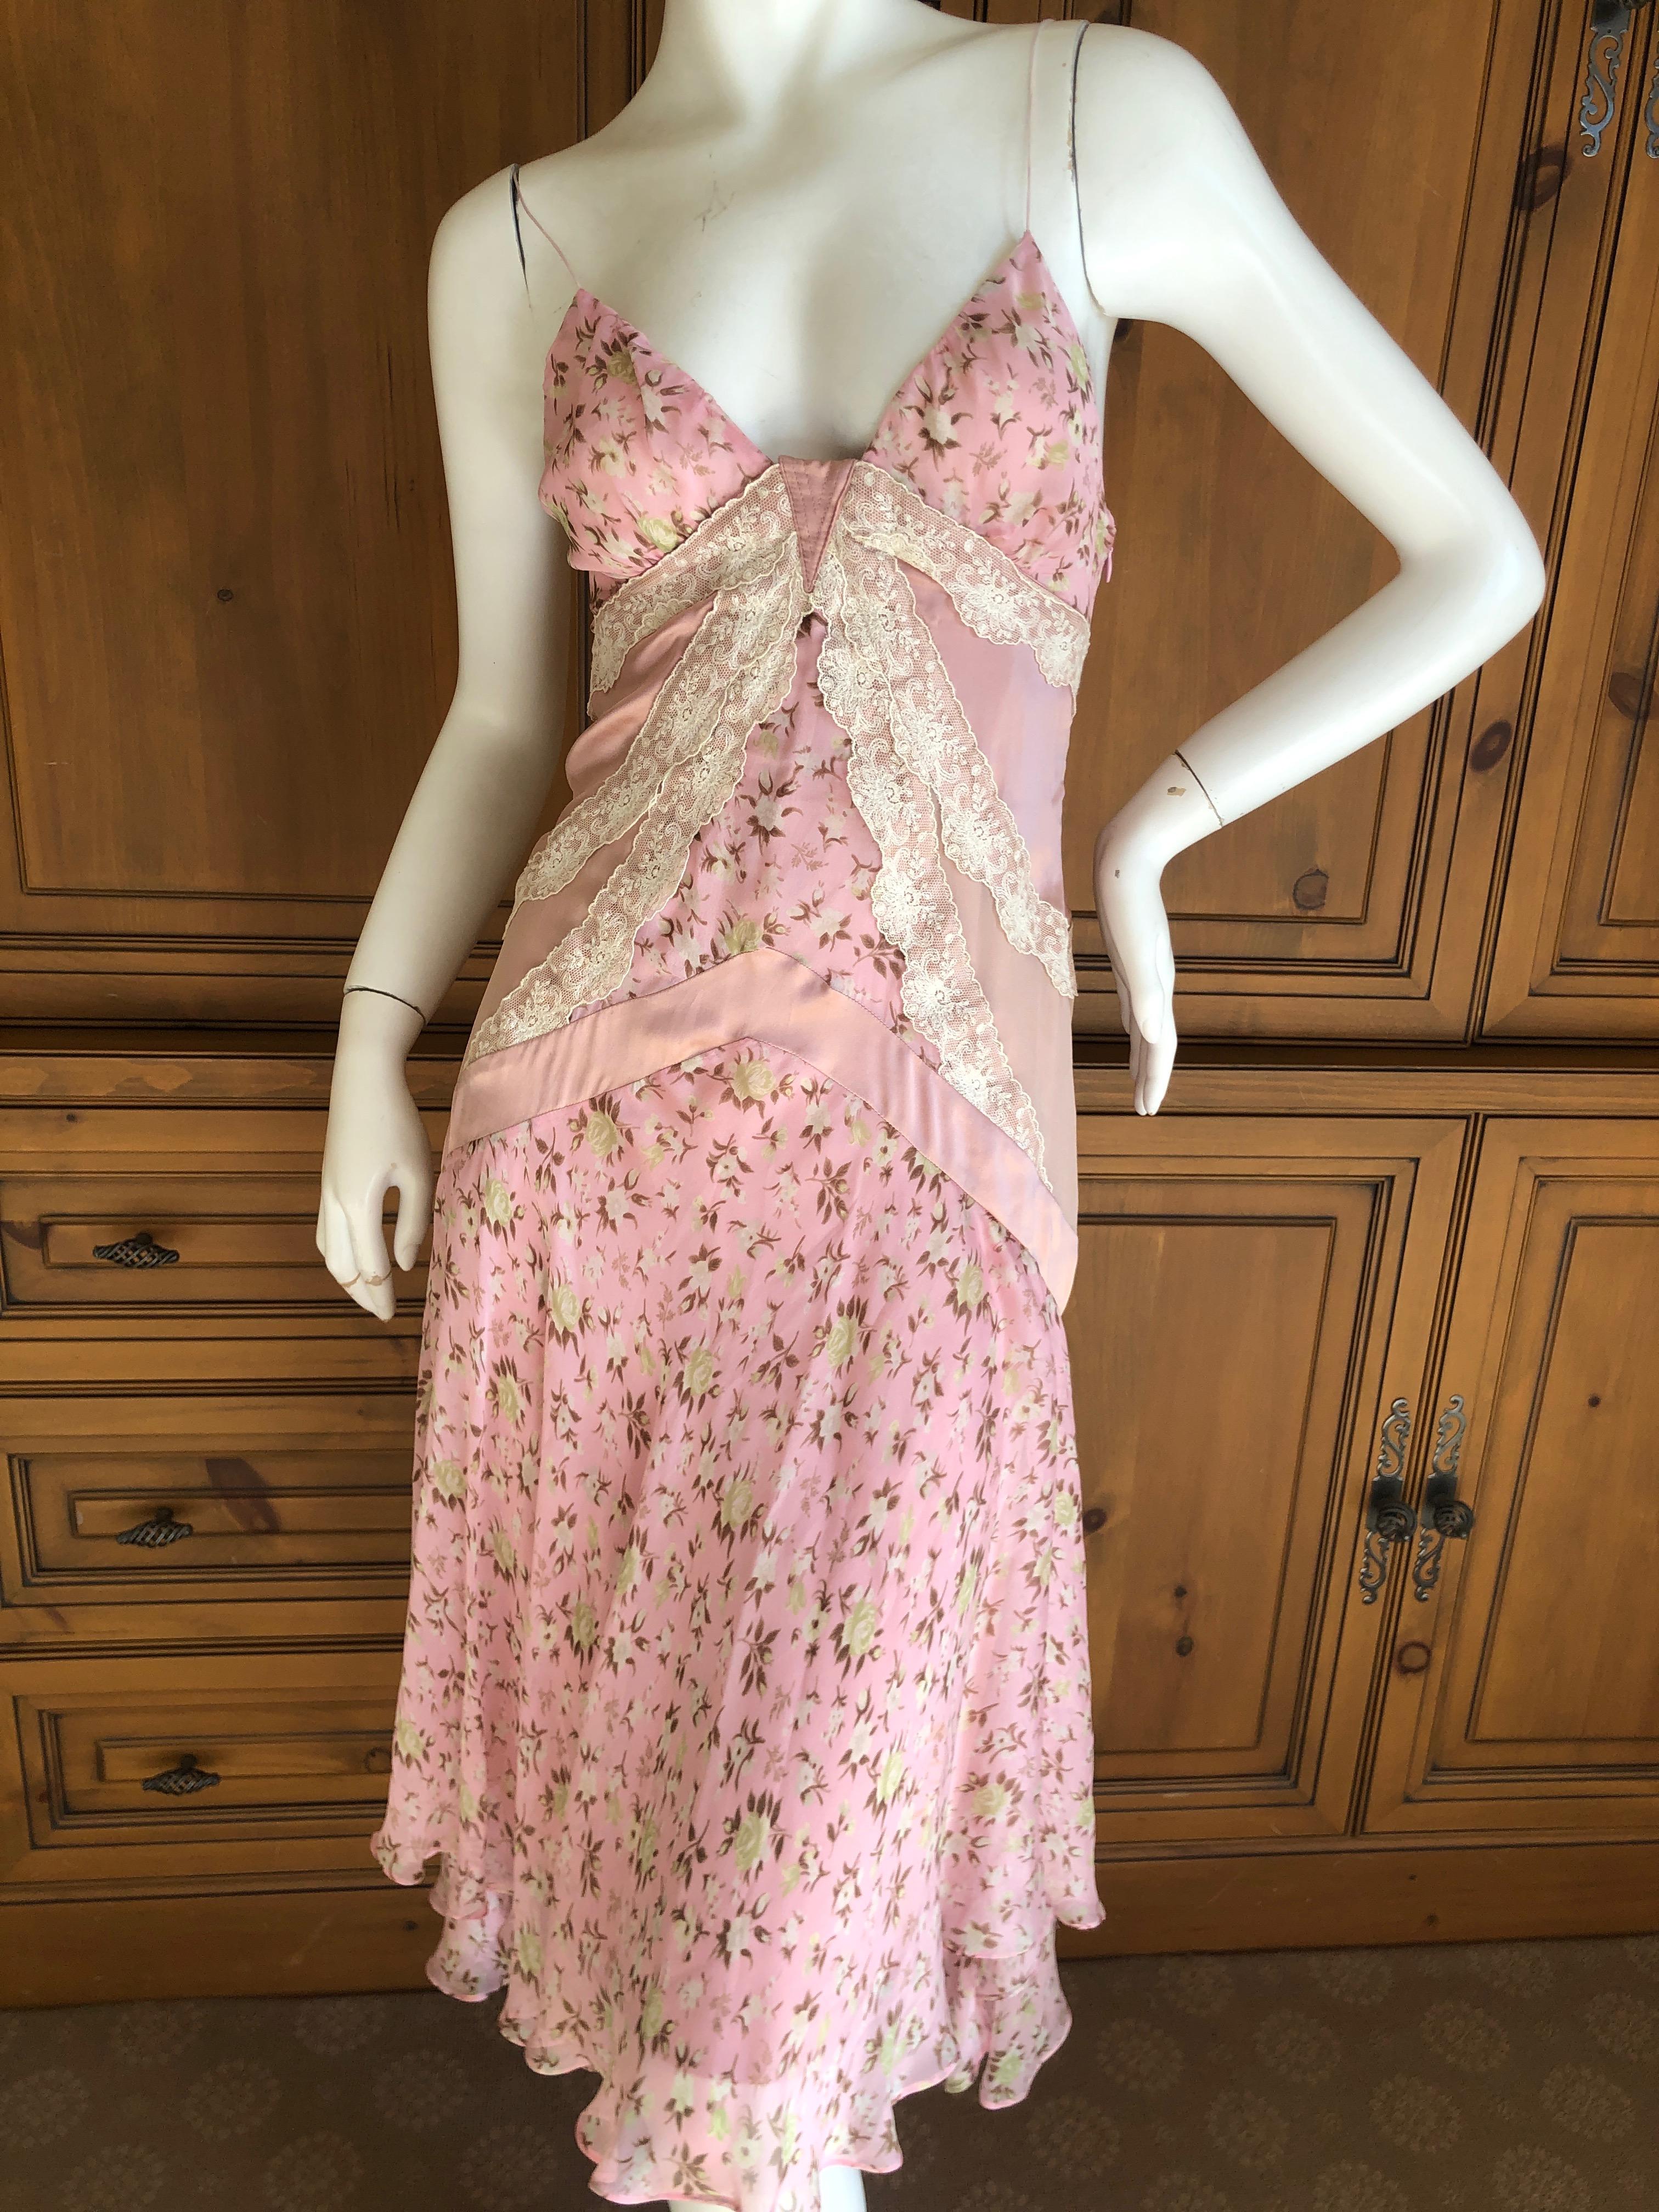 D&G Dolce & Gabbana Romantic Pink Silk Dress with Lace Details
Size 40, but seems to run small
Bust 34